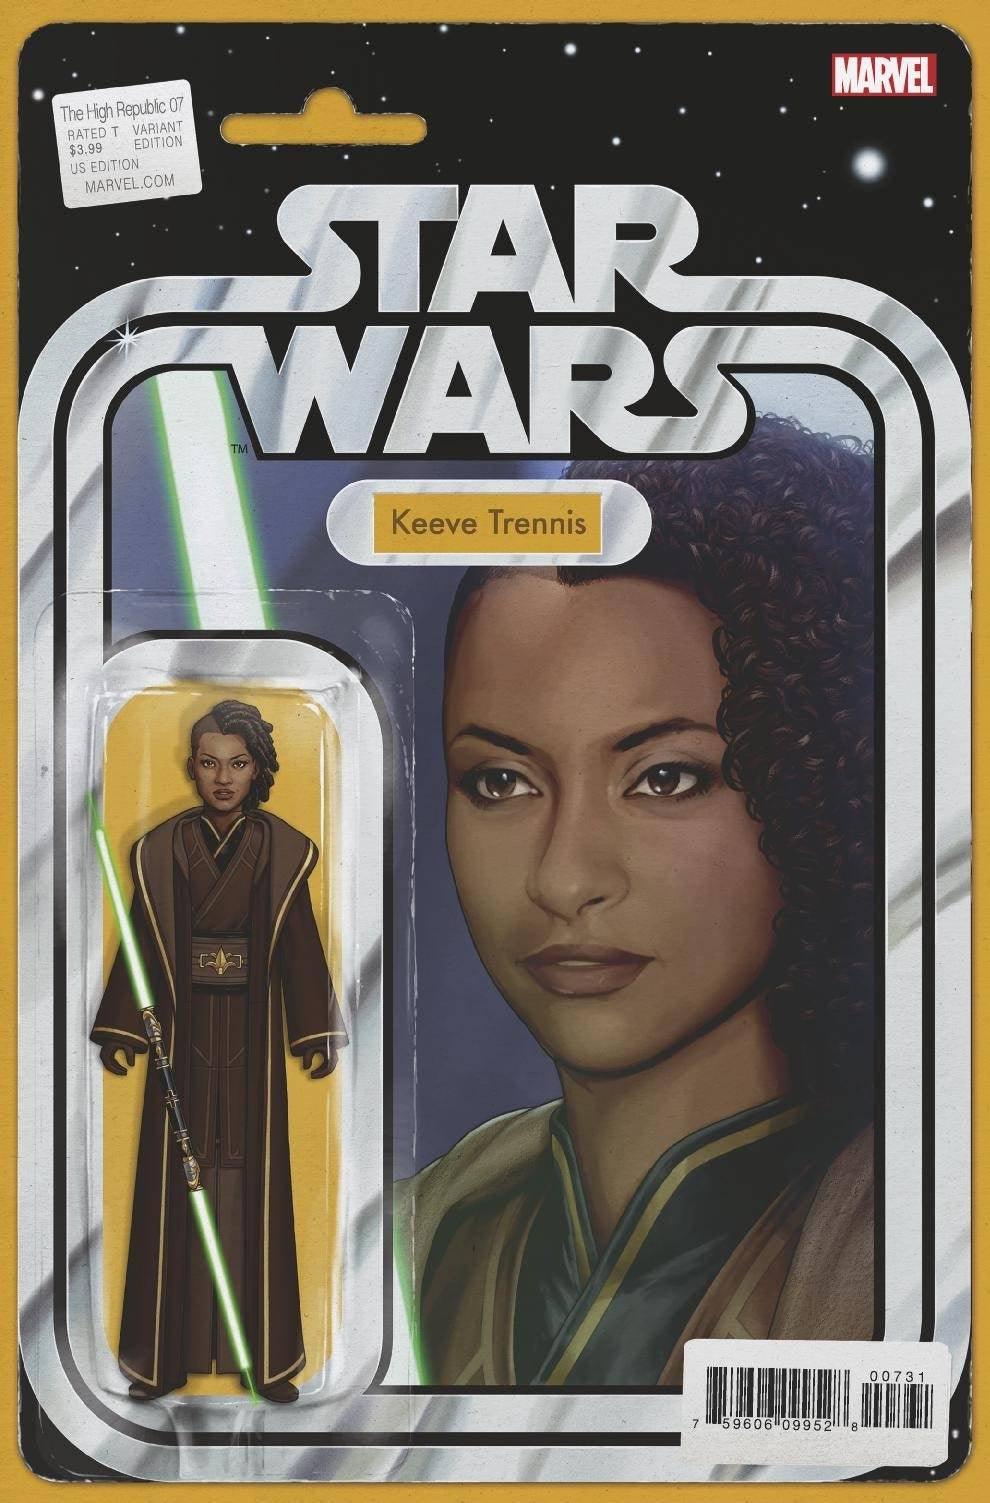 STAR WARS HIGH REPUBLIC #7 CHRISTOPHER ACTION FIGURE VARIANT